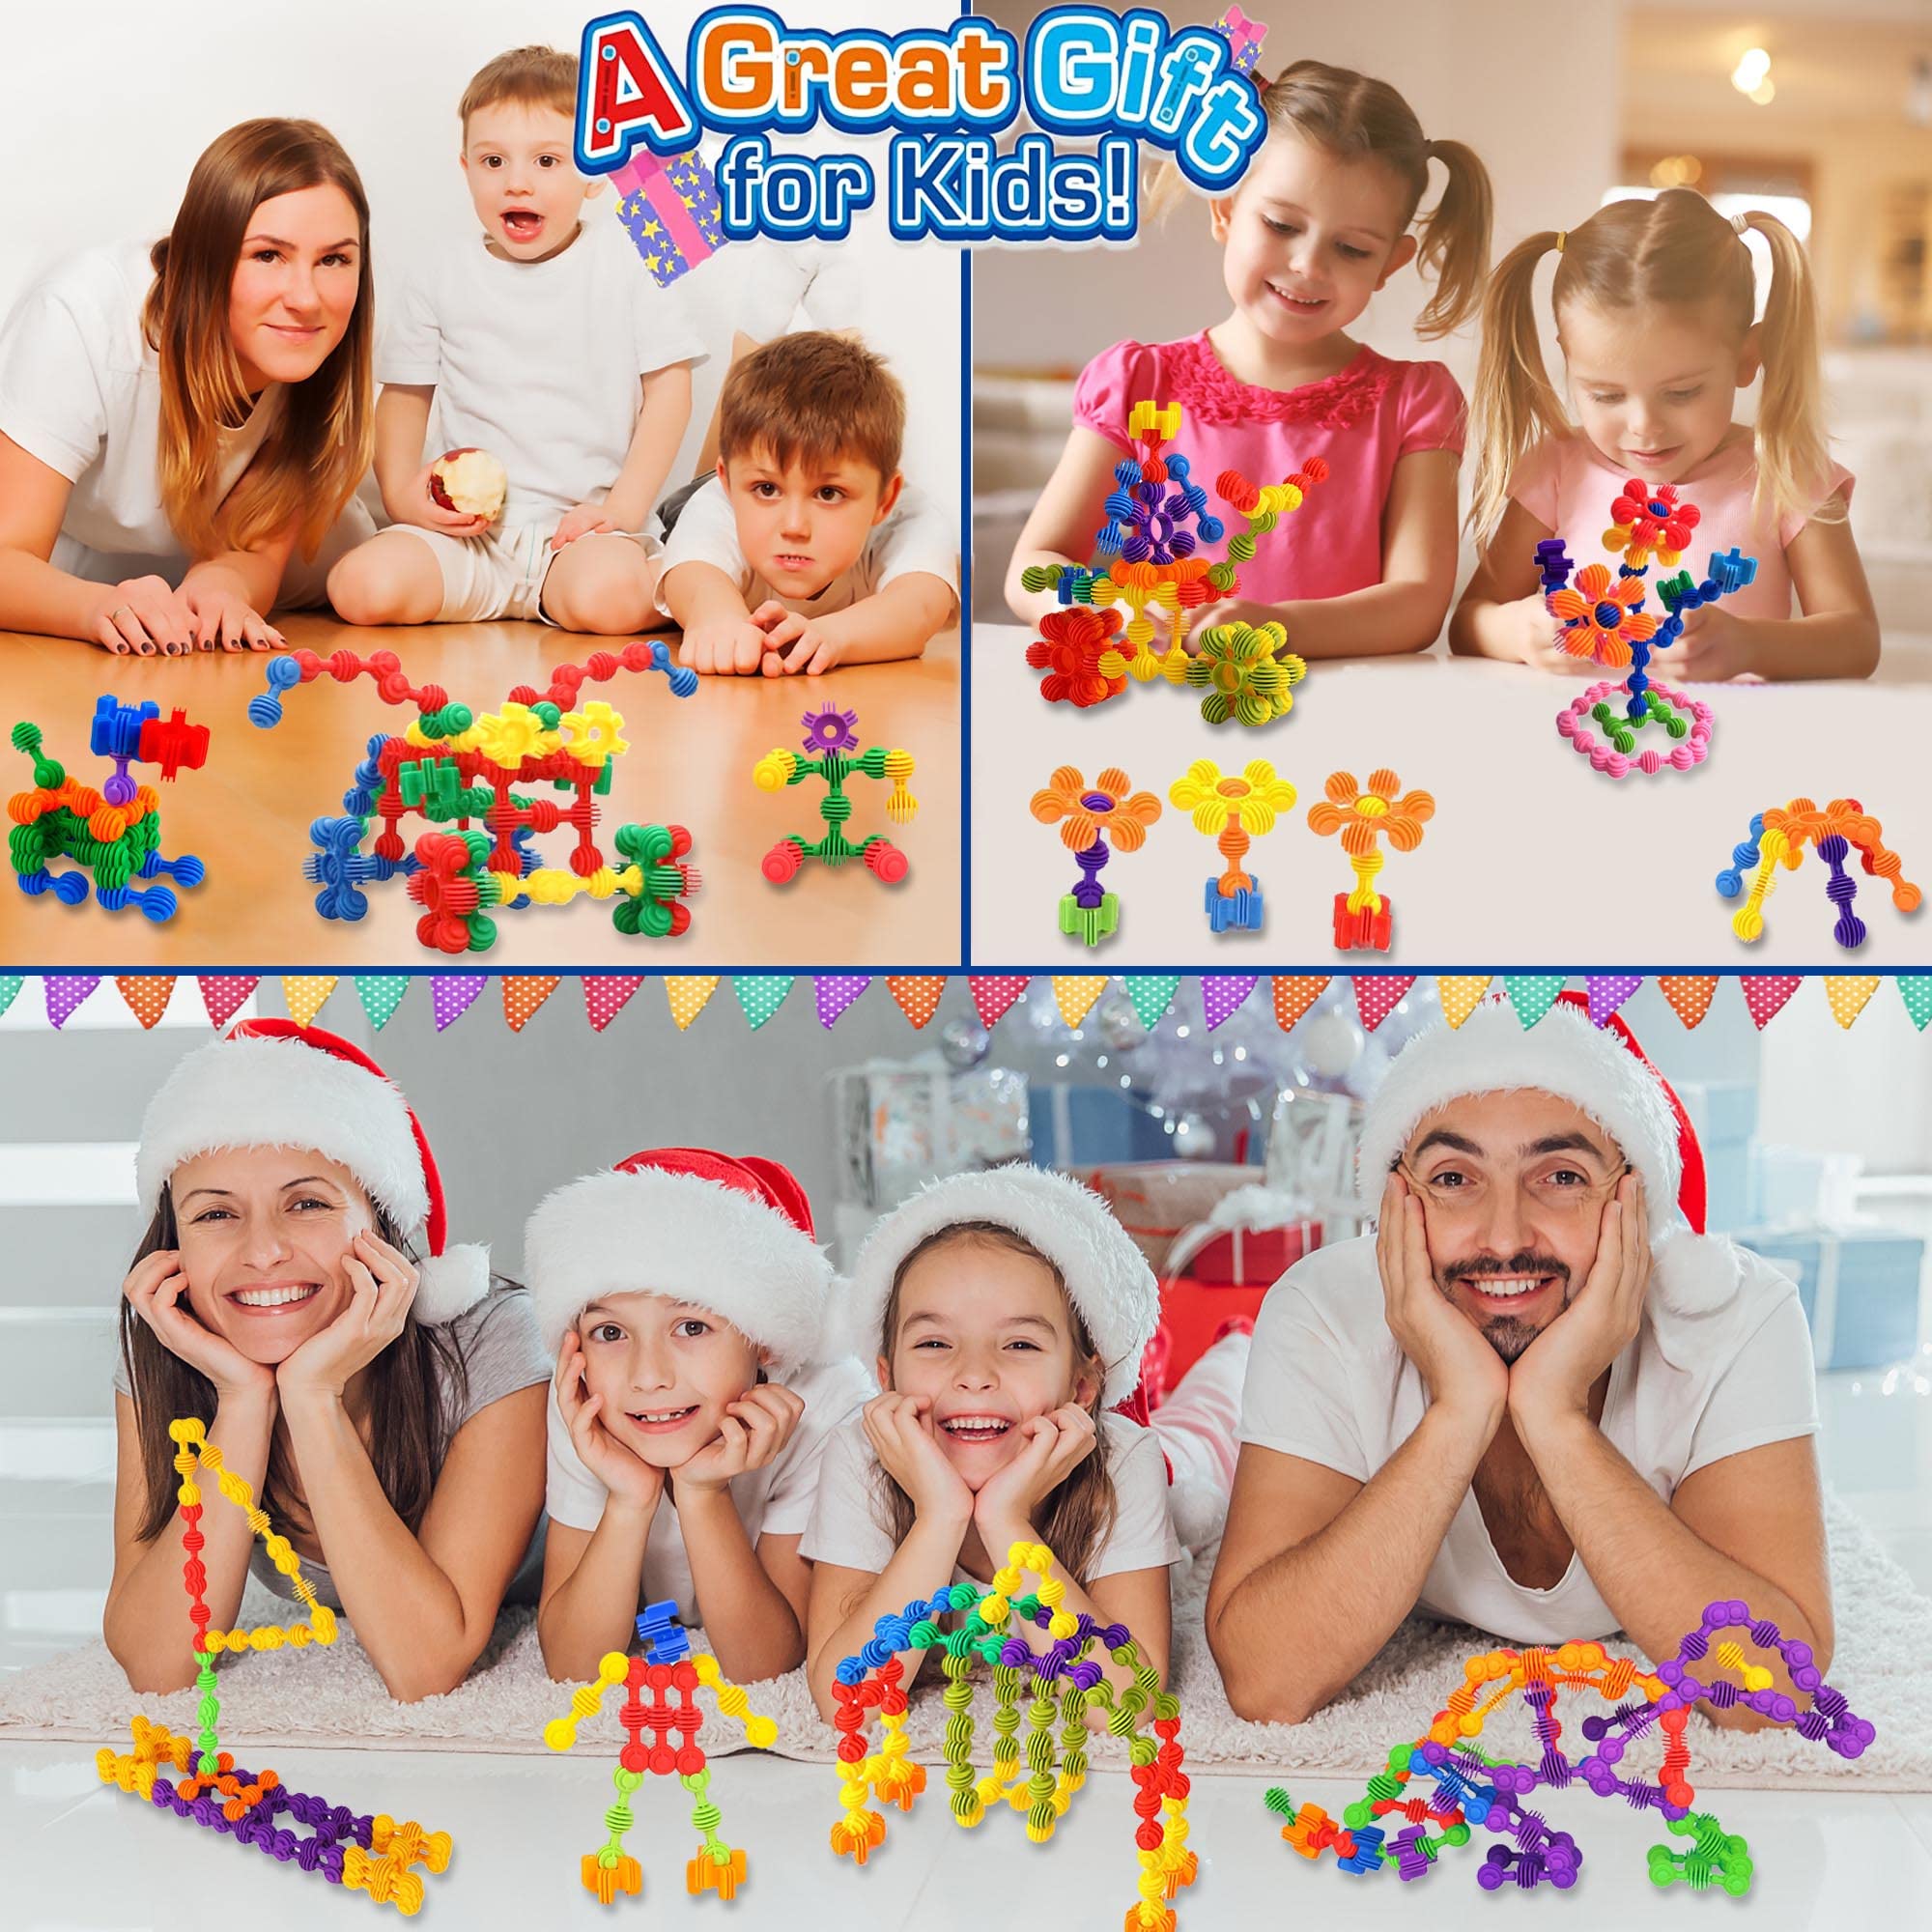 Kids Building Blocks STEM Toys, 120 PCS Create Puzzle Plastic Building Sets That Bends - Safe Material - Toddler Educational Interlocking Toy for Girls and Boys Aged 3+